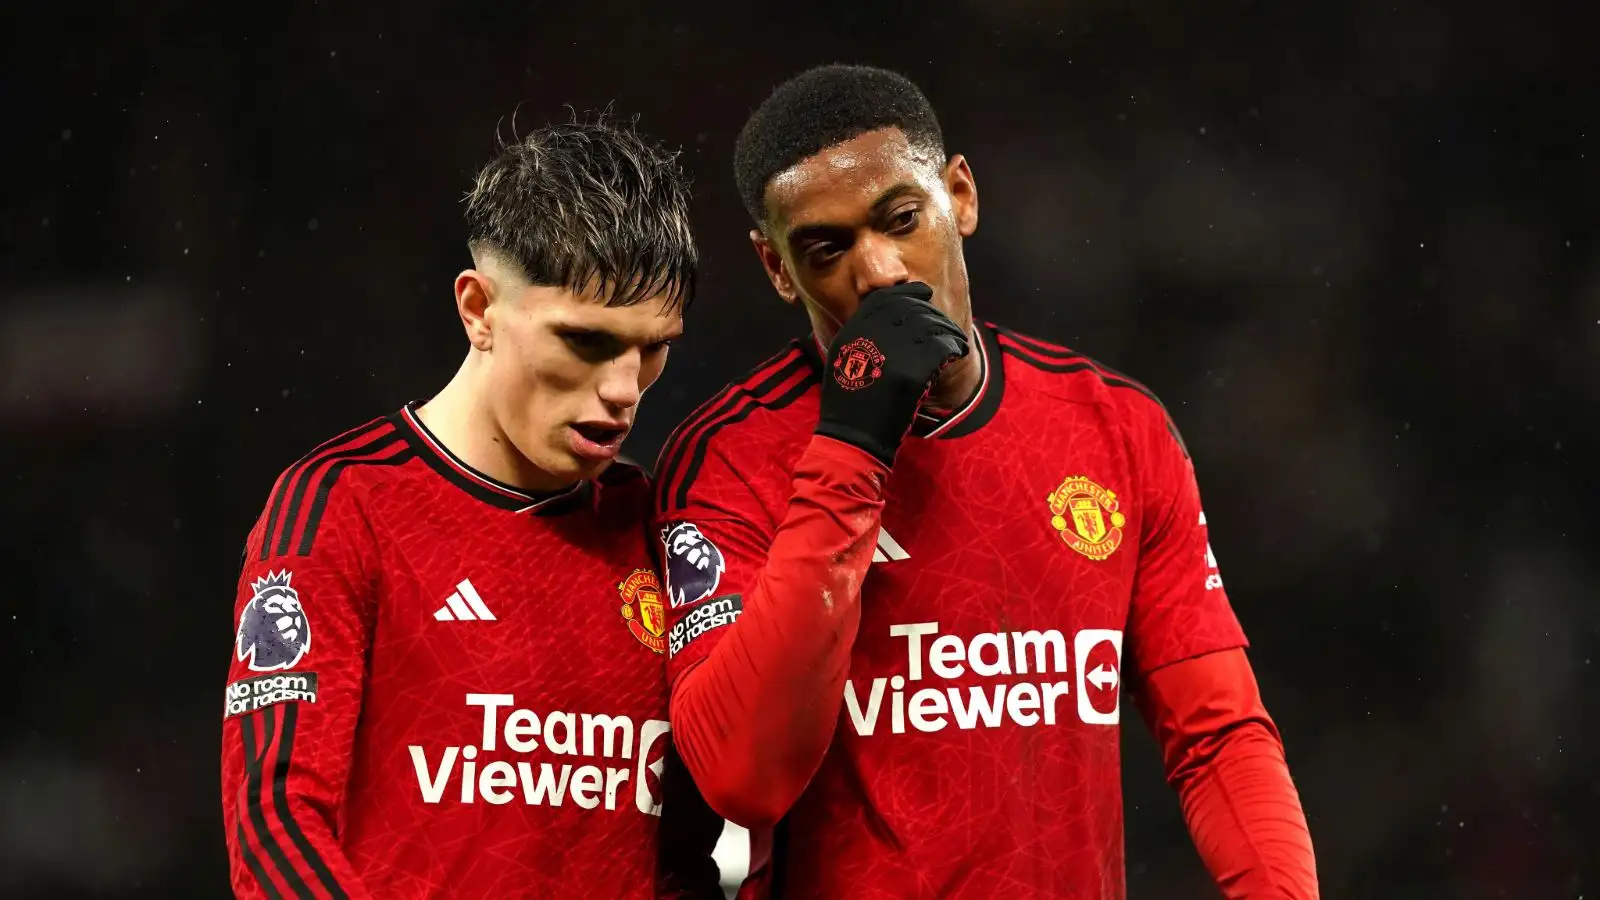 Manchester United duo Alejandro Garnacho and Anthony Martial